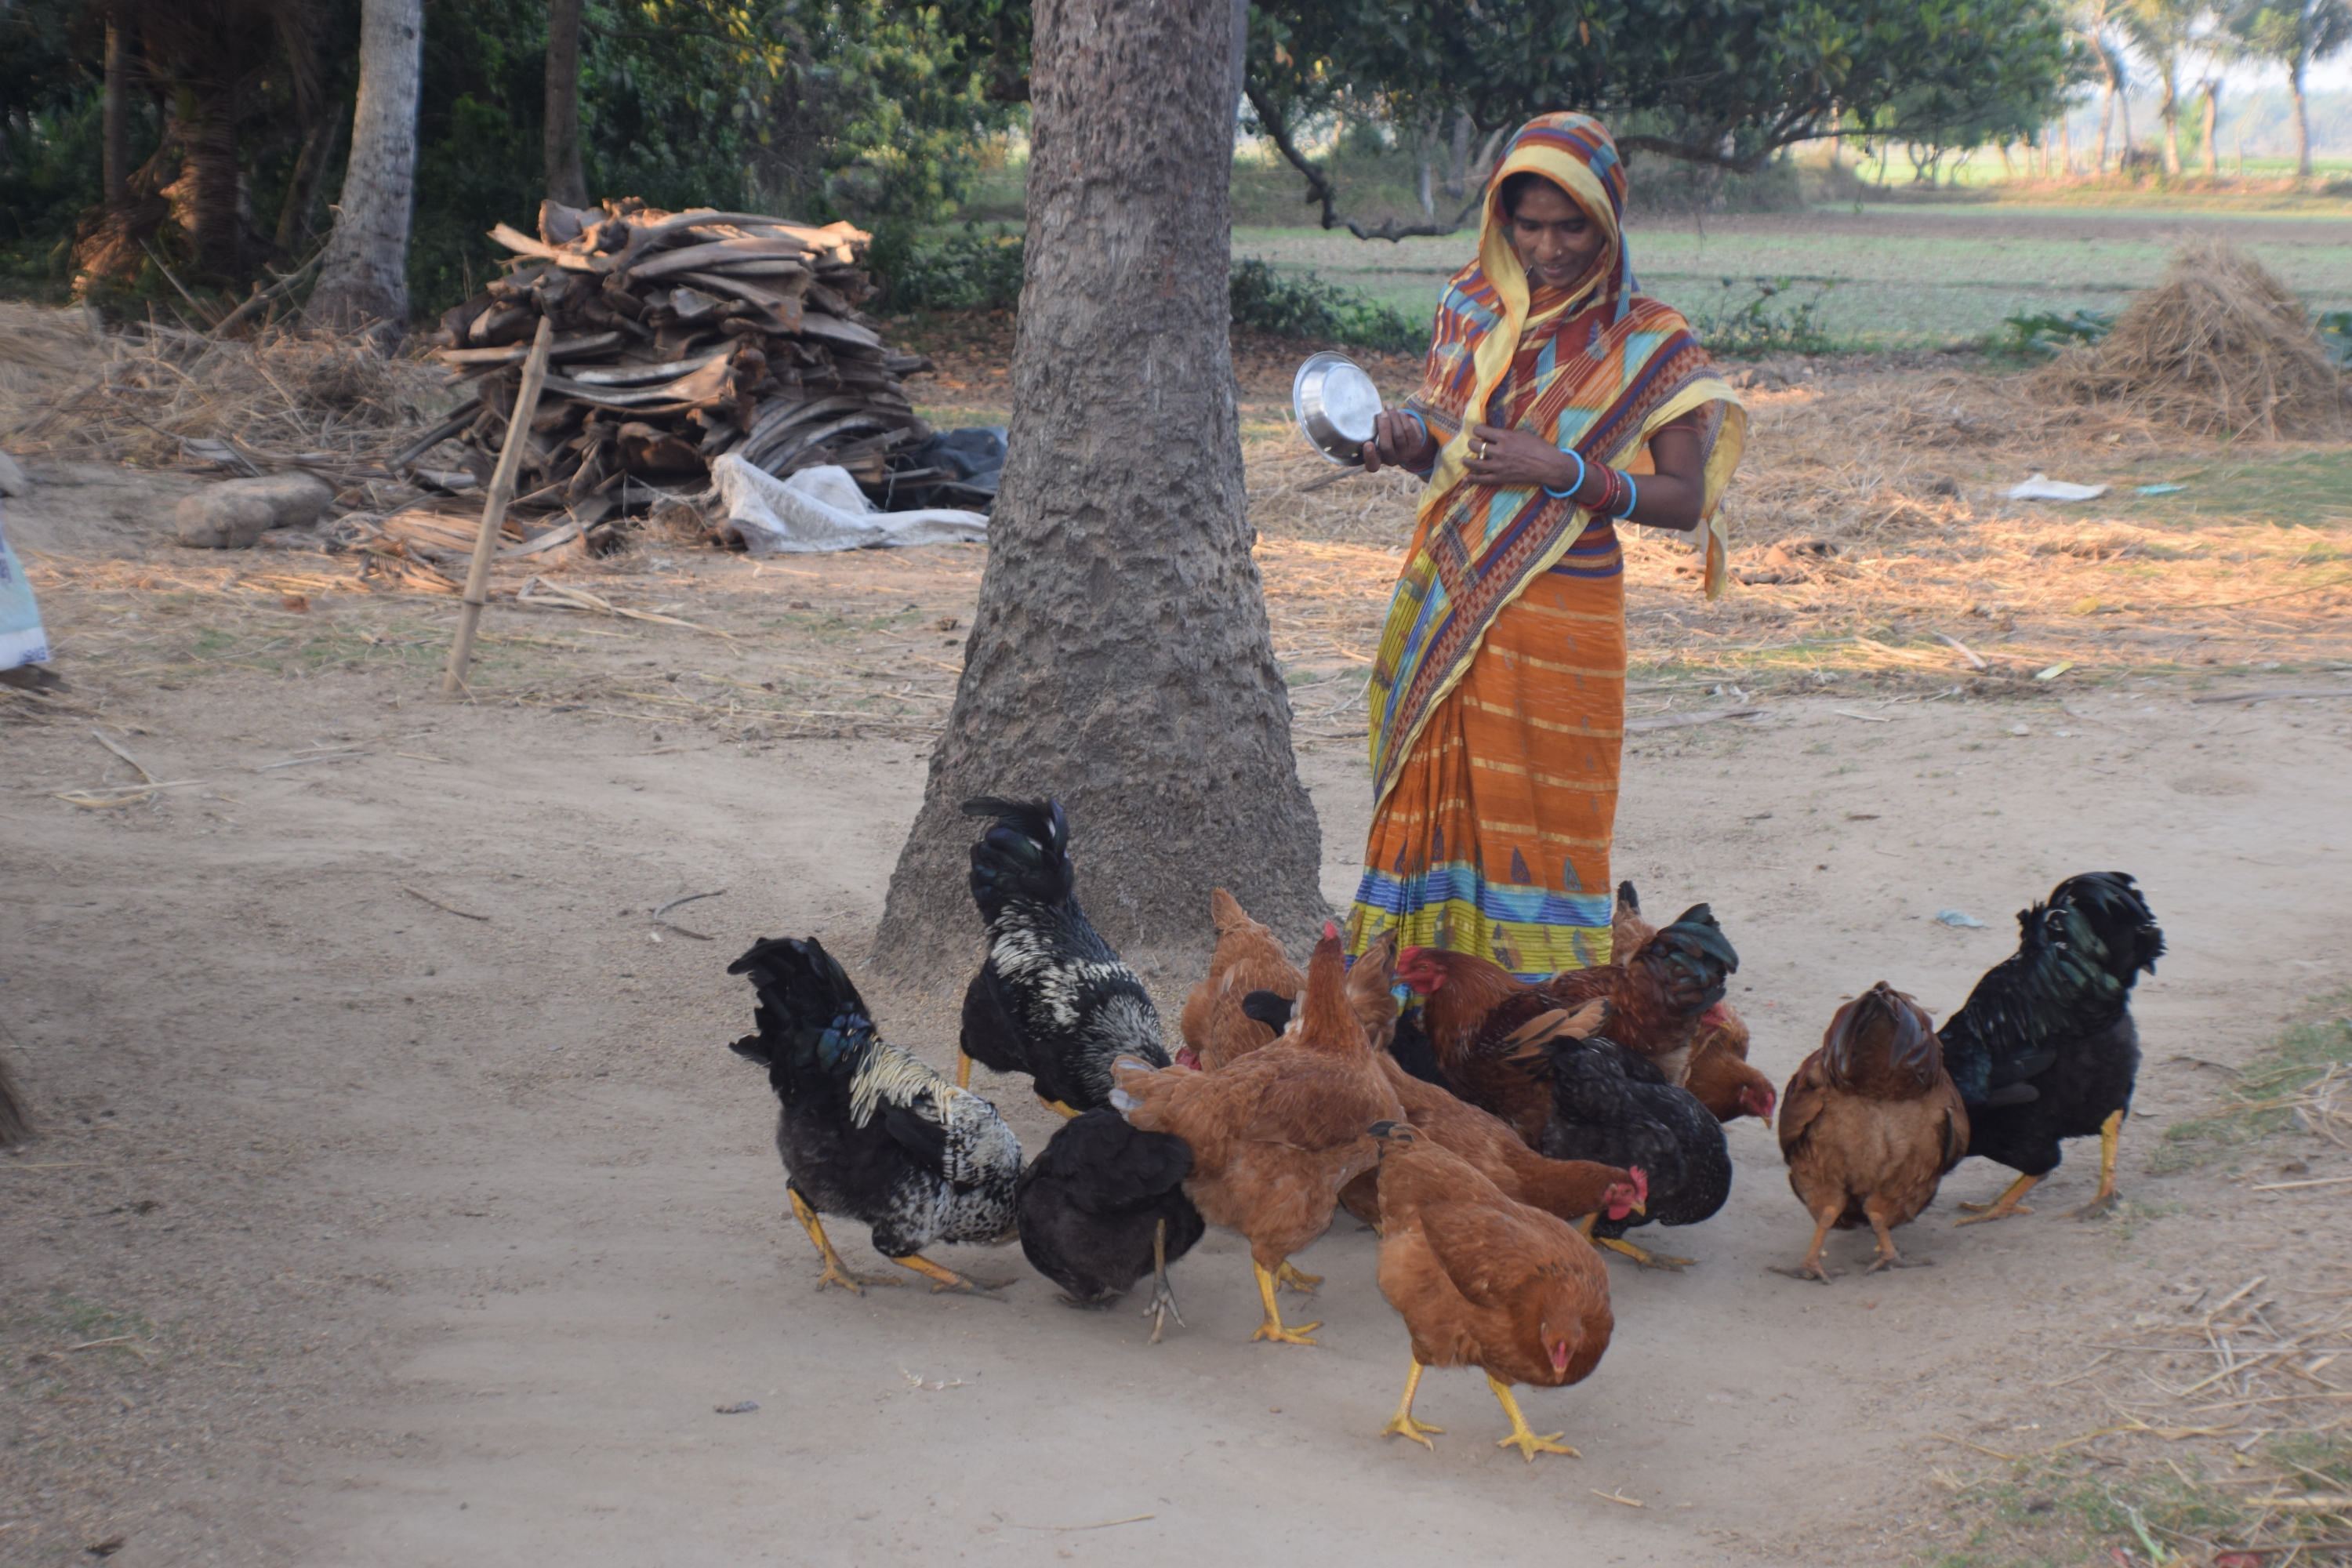 A woman farmer feeds the chicken birds with household food waste